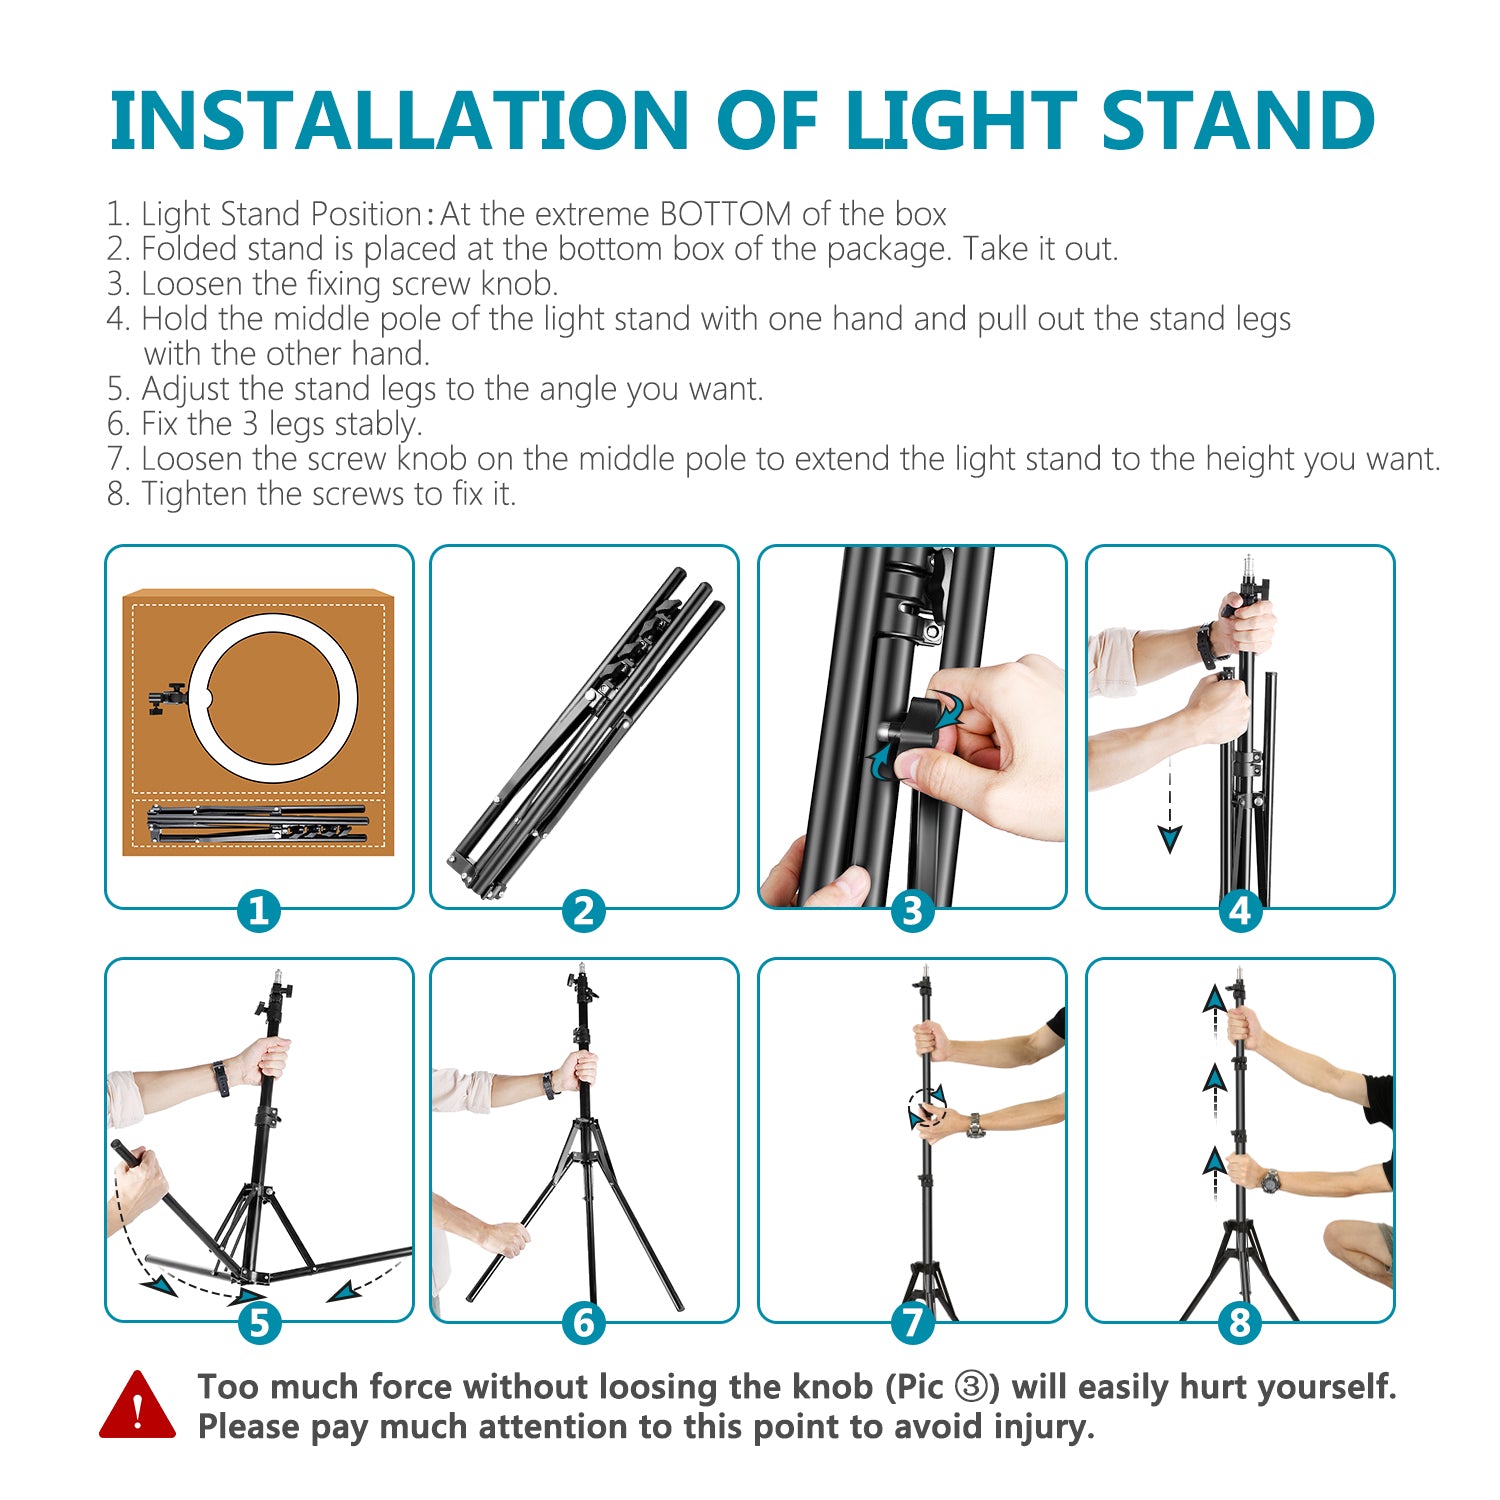 Neewer 14" Dimmable Small LED Ring Light and Stand Kit with Carrying Bag - neewer.com